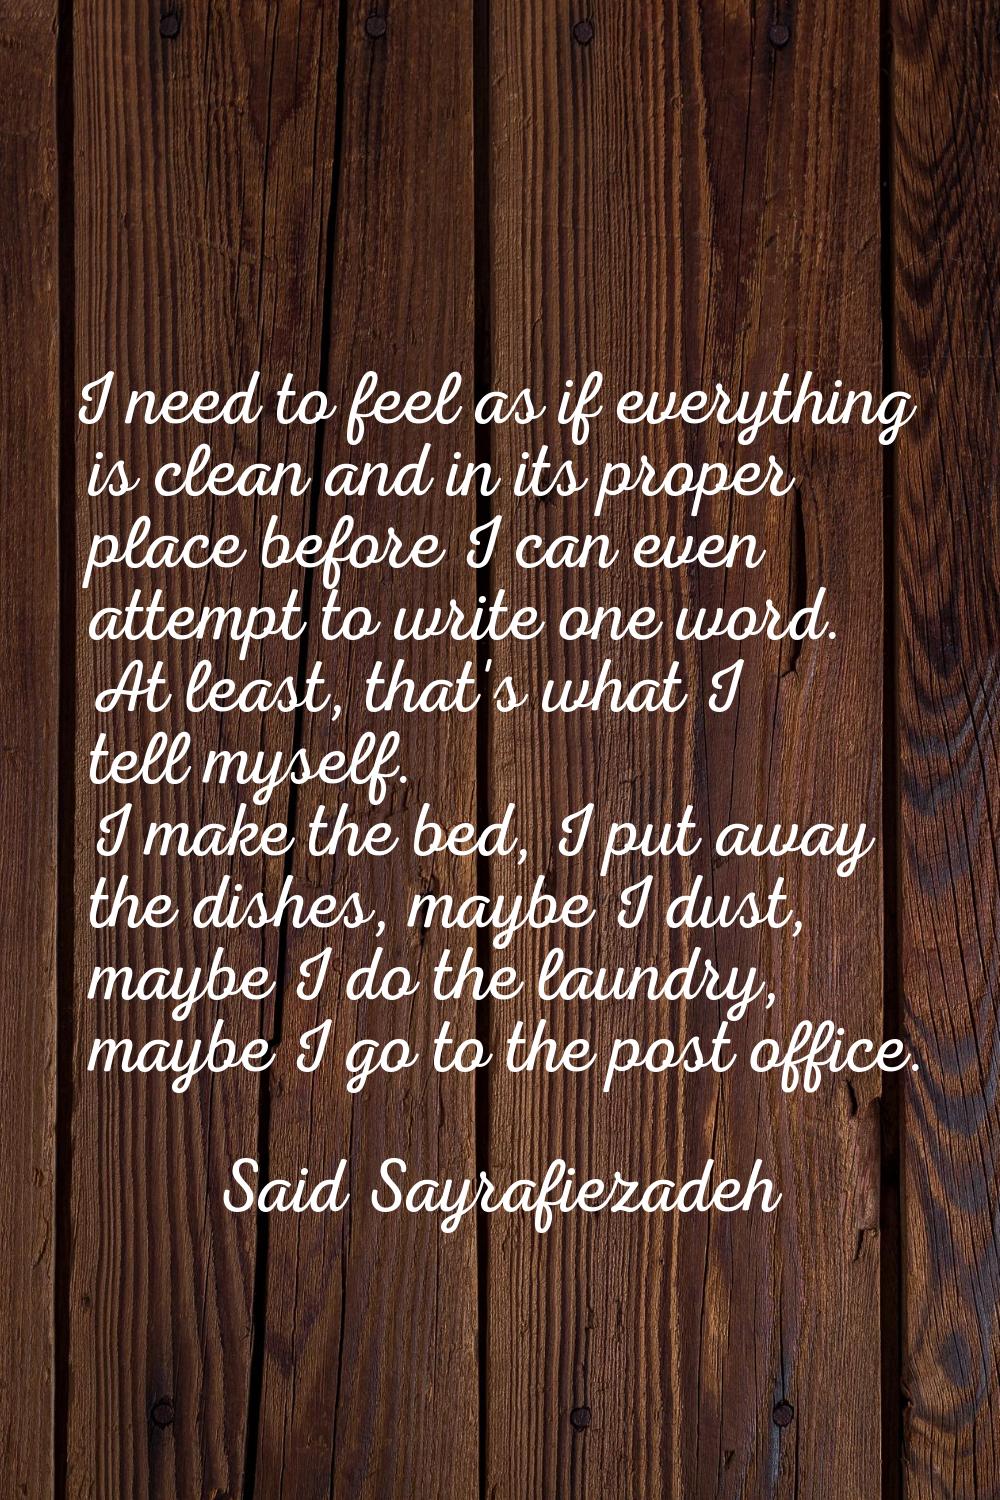 I need to feel as if everything is clean and in its proper place before I can even attempt to write